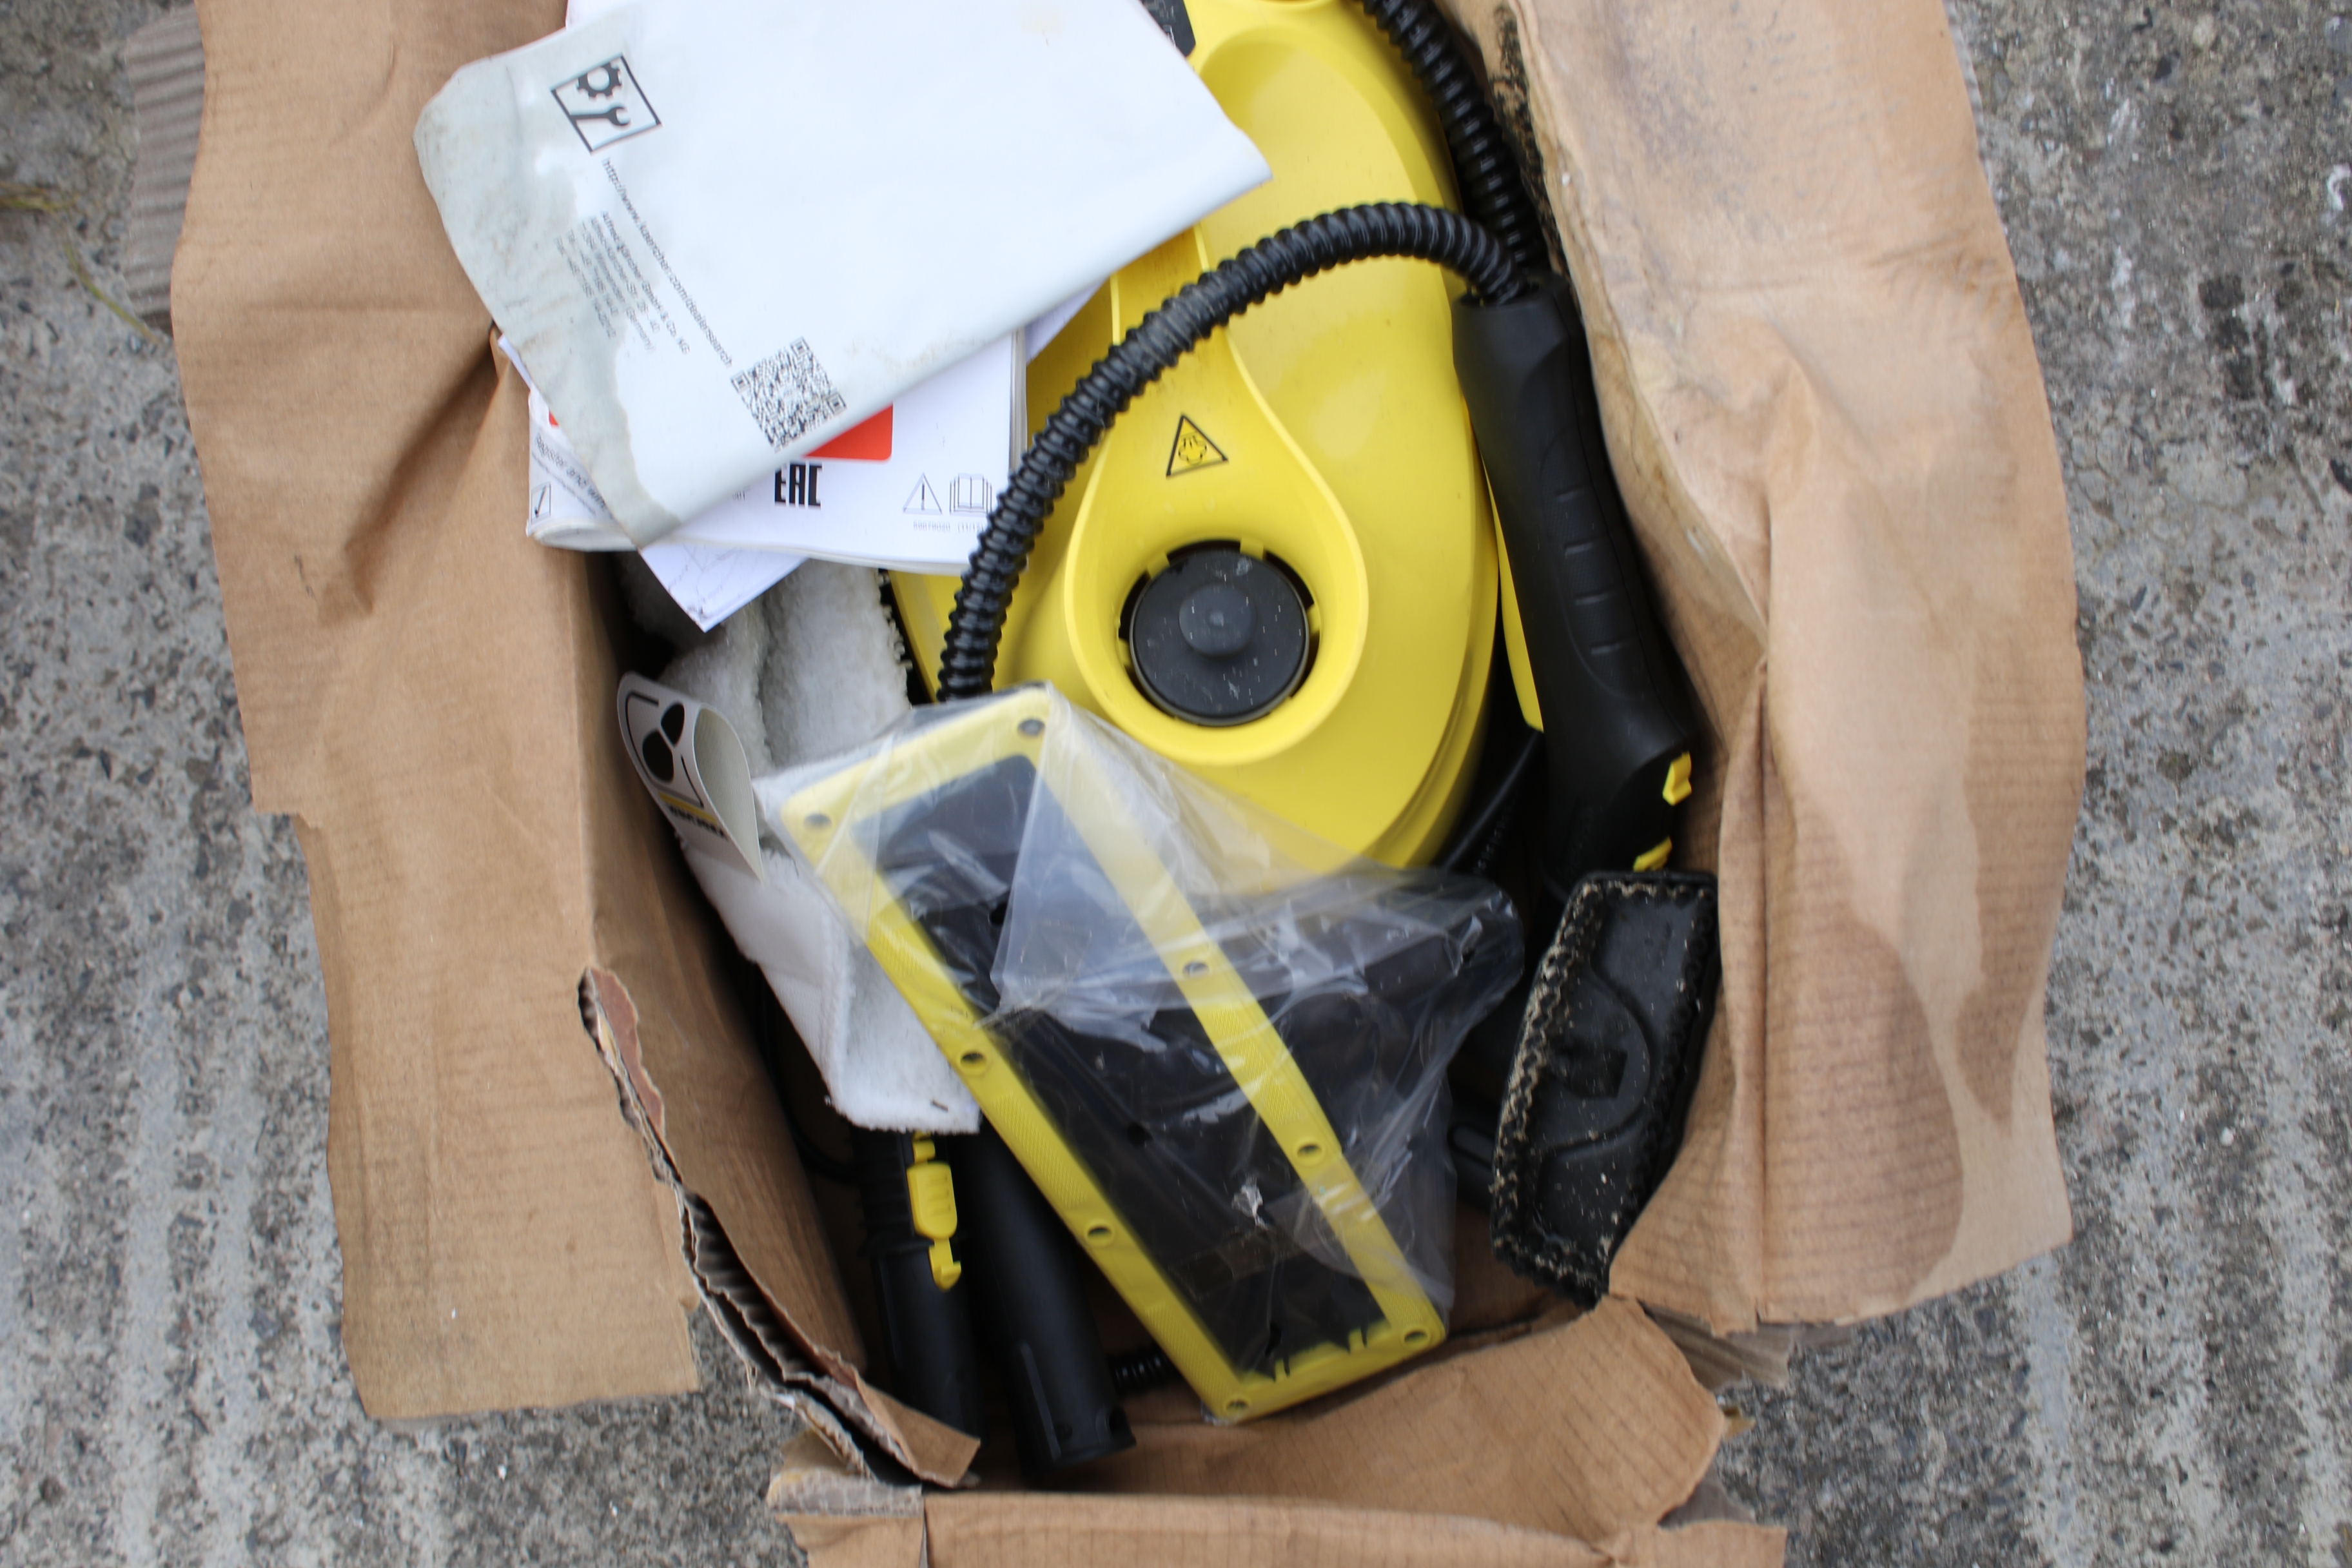 A Karcher SC 3 EasyFix steam cleaner. With some attachments. - Image 2 of 2